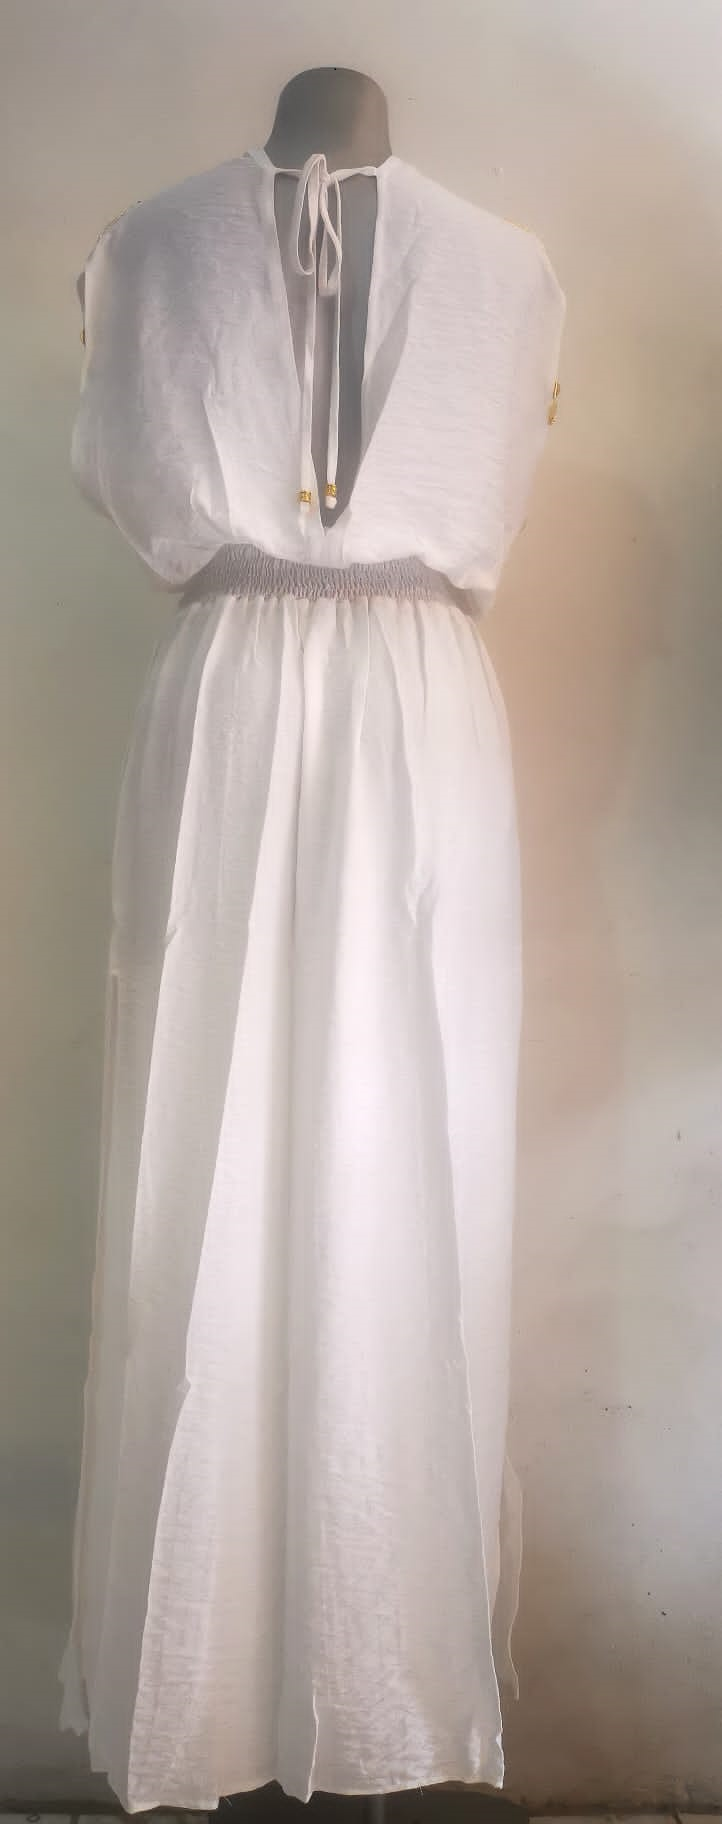 FAIRY LONG DRESS BACKLESS COTTON / LINEN ONE SIZE WHITE OR CREAM COLOR